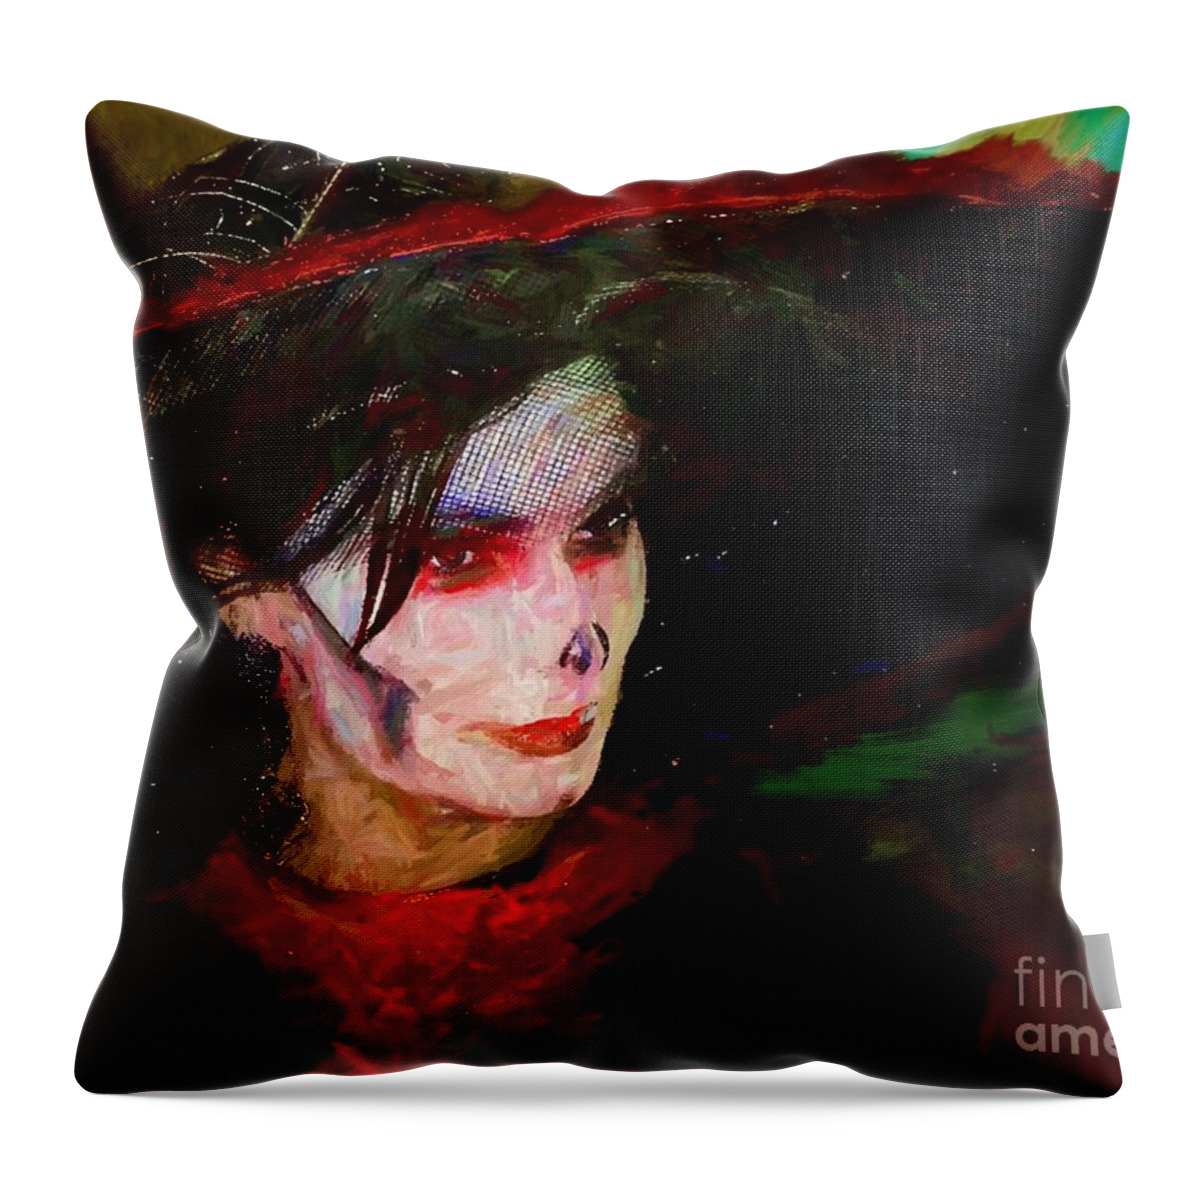 John+kolenberg Throw Pillow featuring the photograph The Lady In Red by John Kolenberg